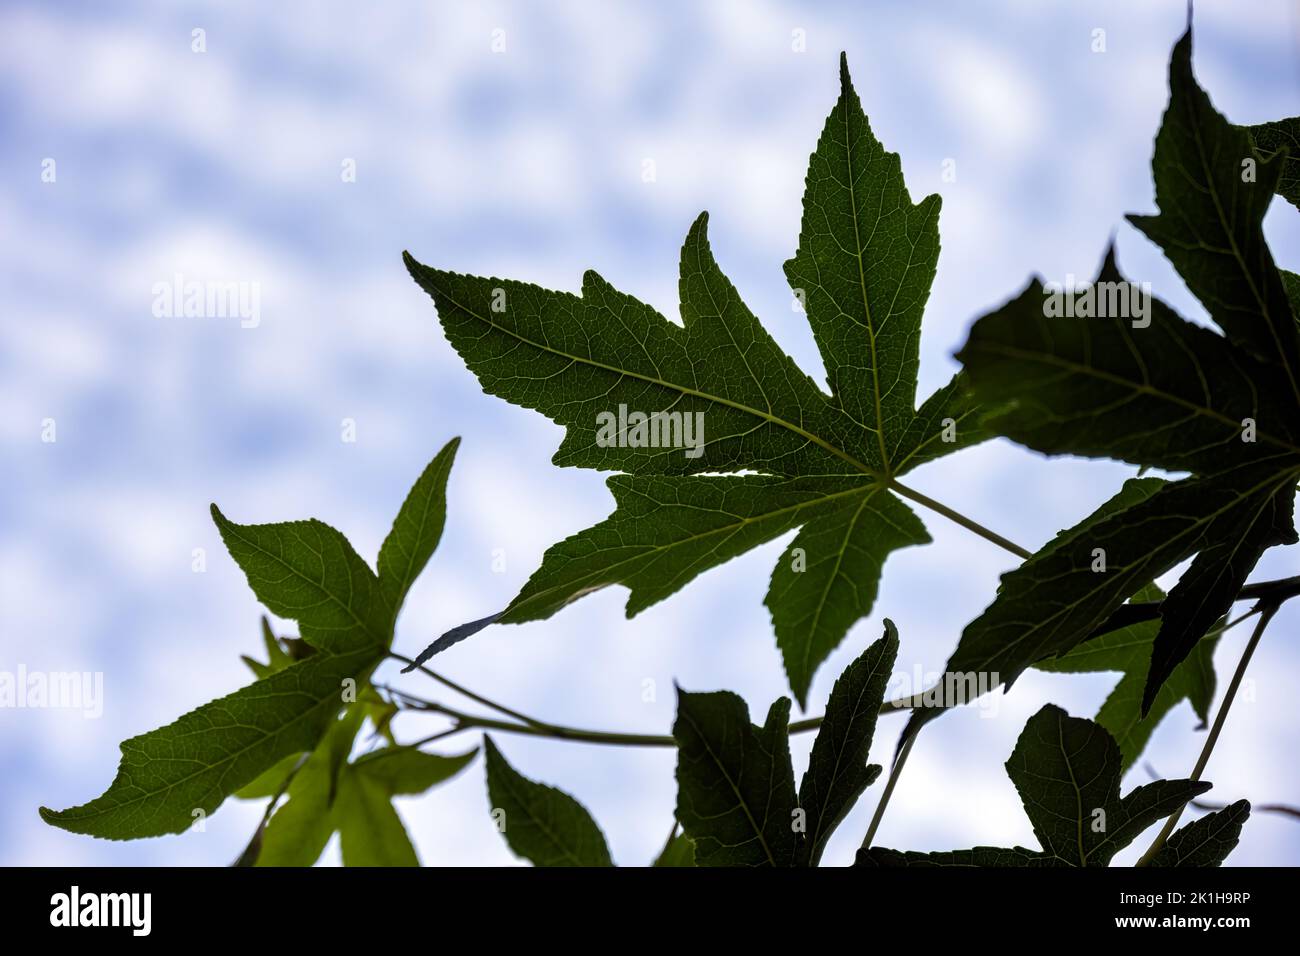 Liquidambar or sweetgum leaves against a sky with white clouds, use as background Stock Photo